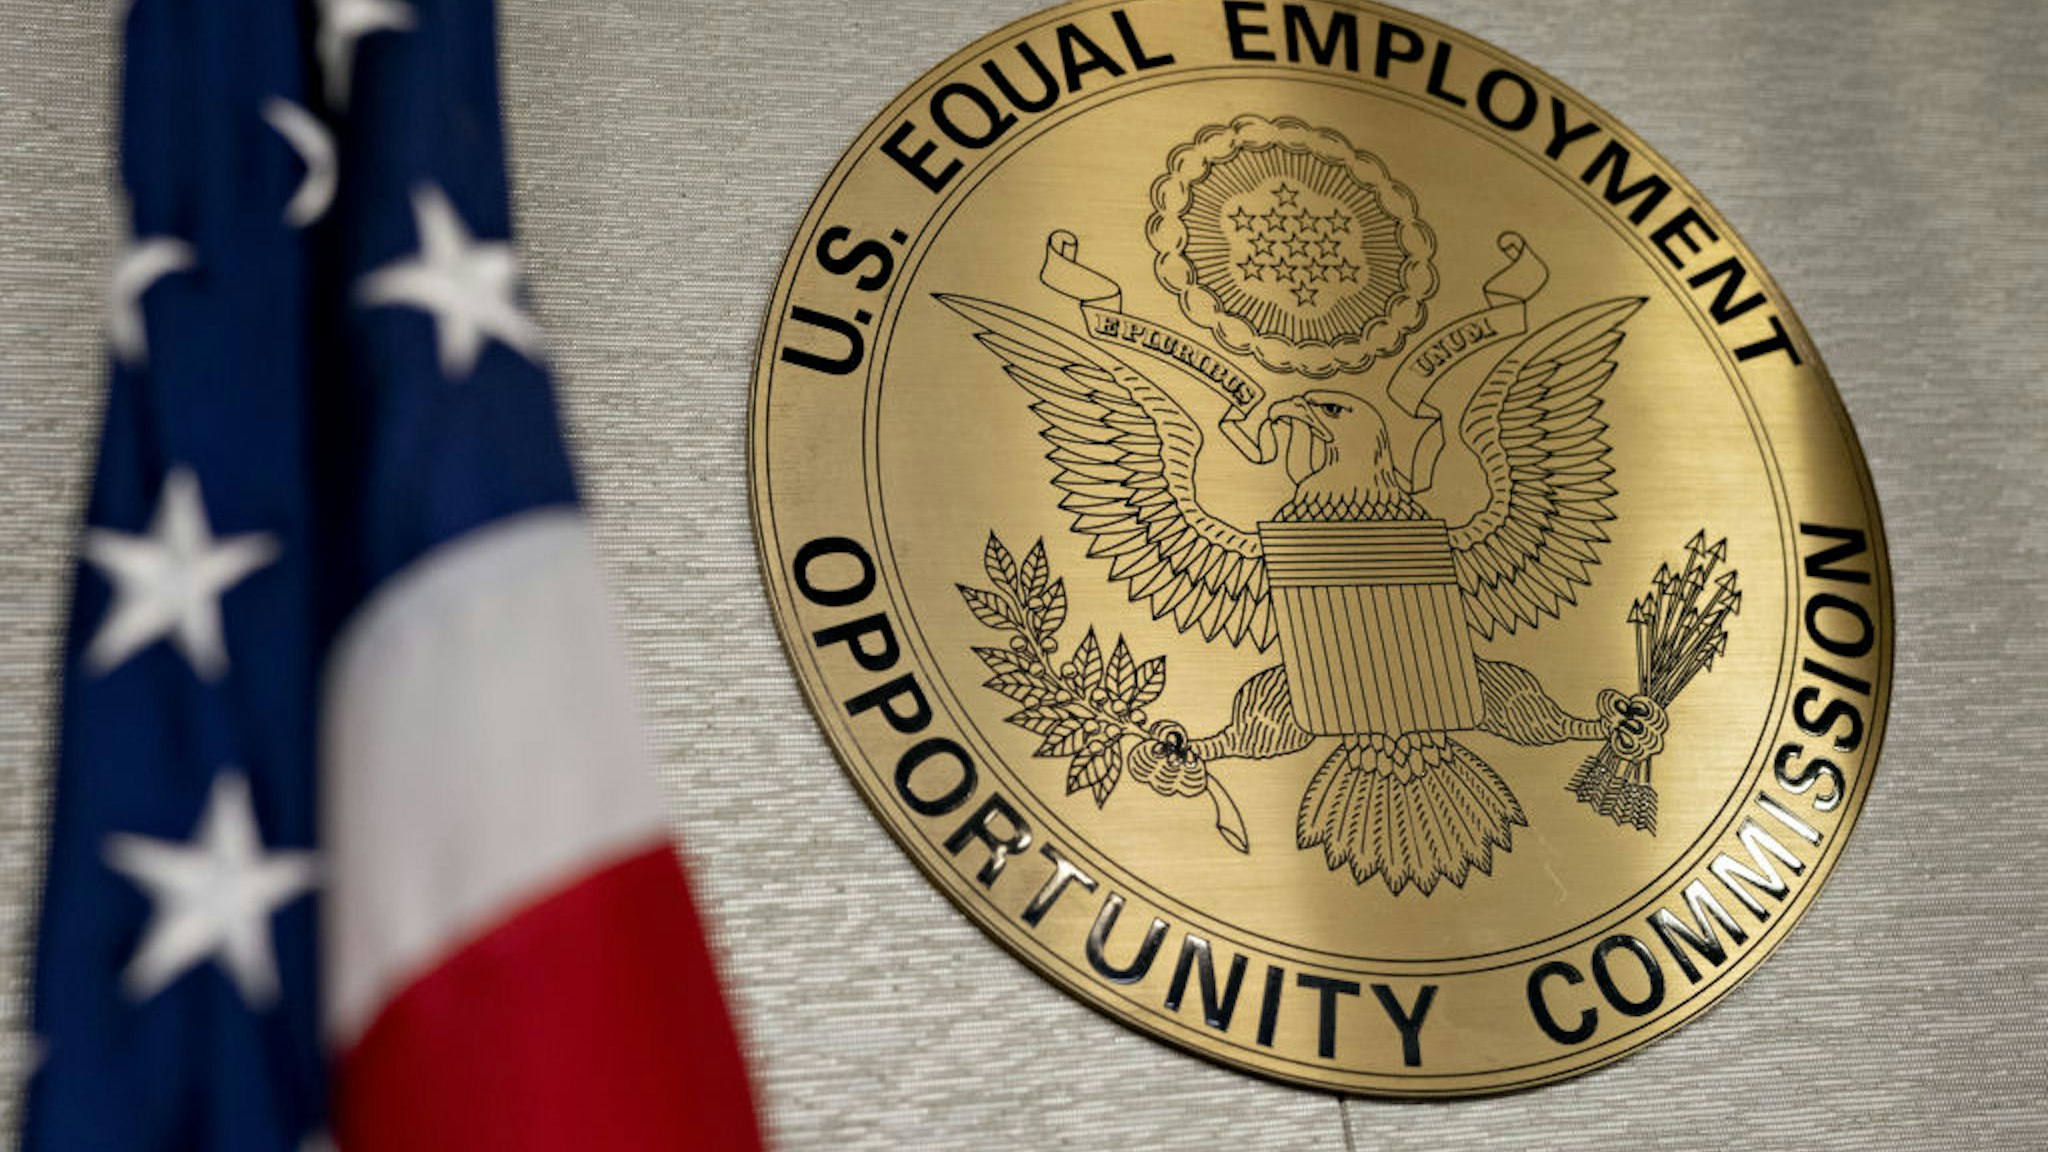 The Equal Employment Opportunity Commission (EEOC) seal hangs inside a hearing room at the headquarters in Washington, D.C., U.S., on Tuesday, Feb. 18, 2020. The Trump administration wants to cut fiscal year 2021 spending on the Labor Department, National Labor Relations Board, and EEOC, reviving previous belt-tightening bids that have not been approved by Congress.